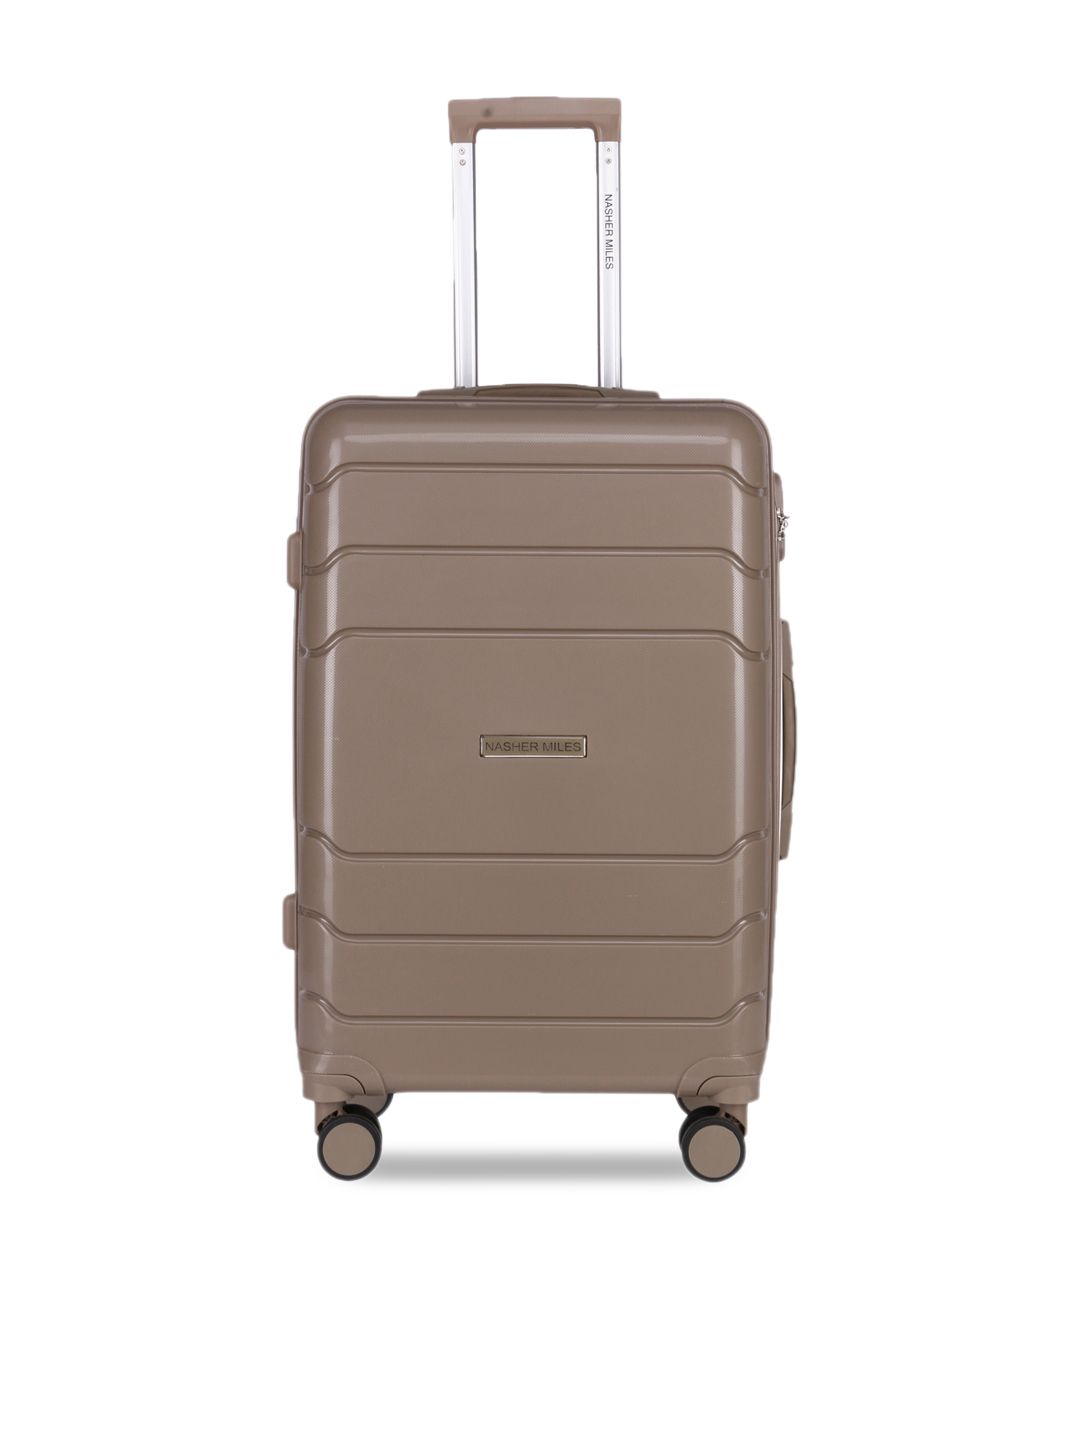 Nasher Miles Unisex Taupe Solid Hard-Sided Trolley Price in India